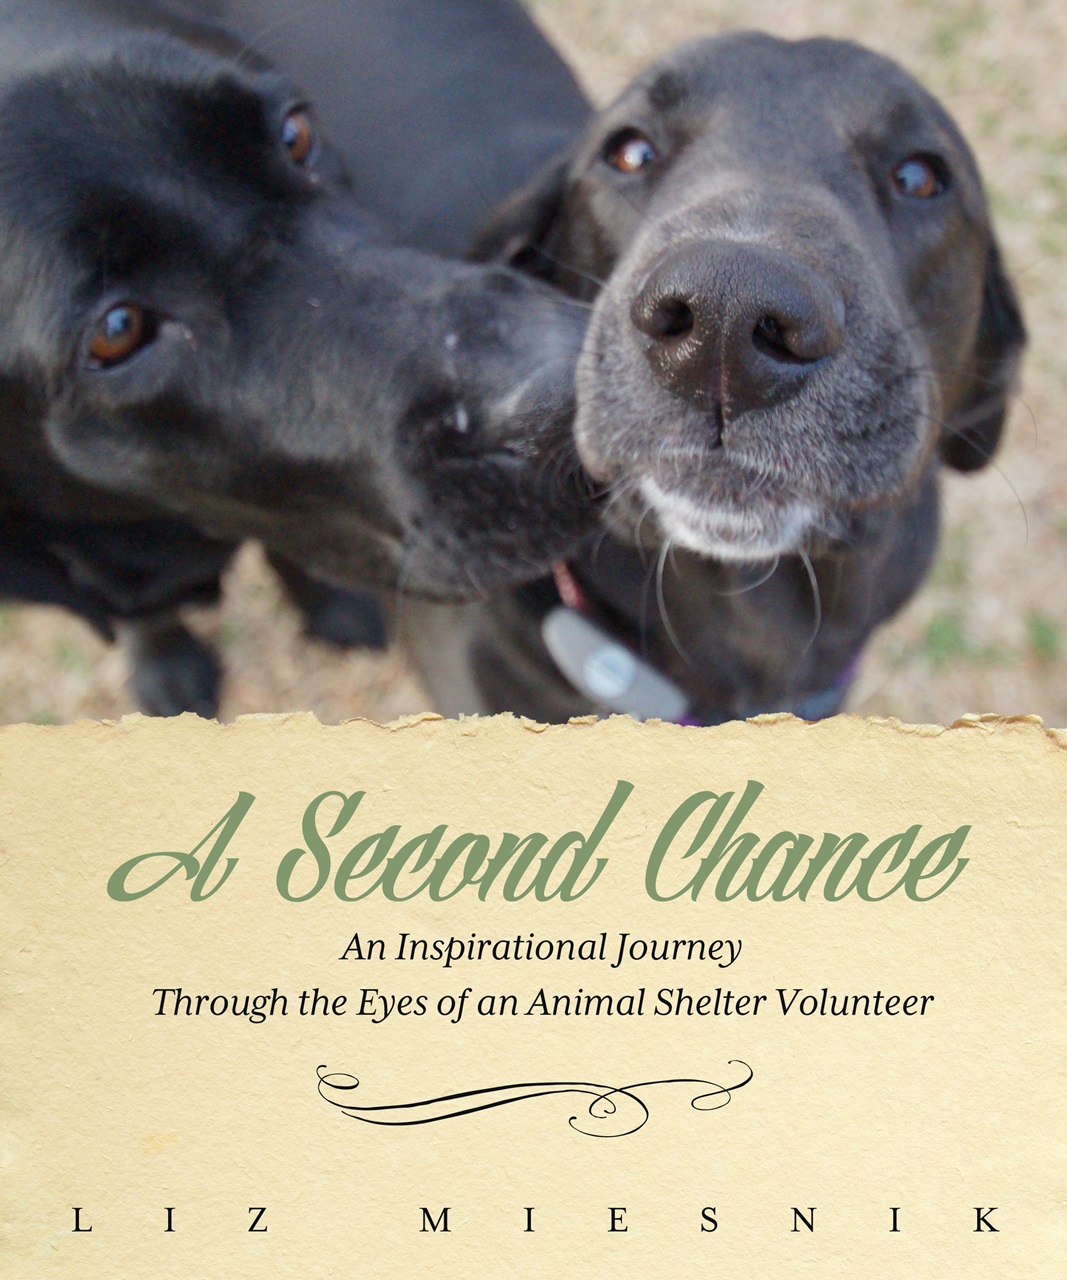 "A Second Chance...An Inspirational Journey Through the Eyes of an Animal Shelter Volunteer" Cover Photo